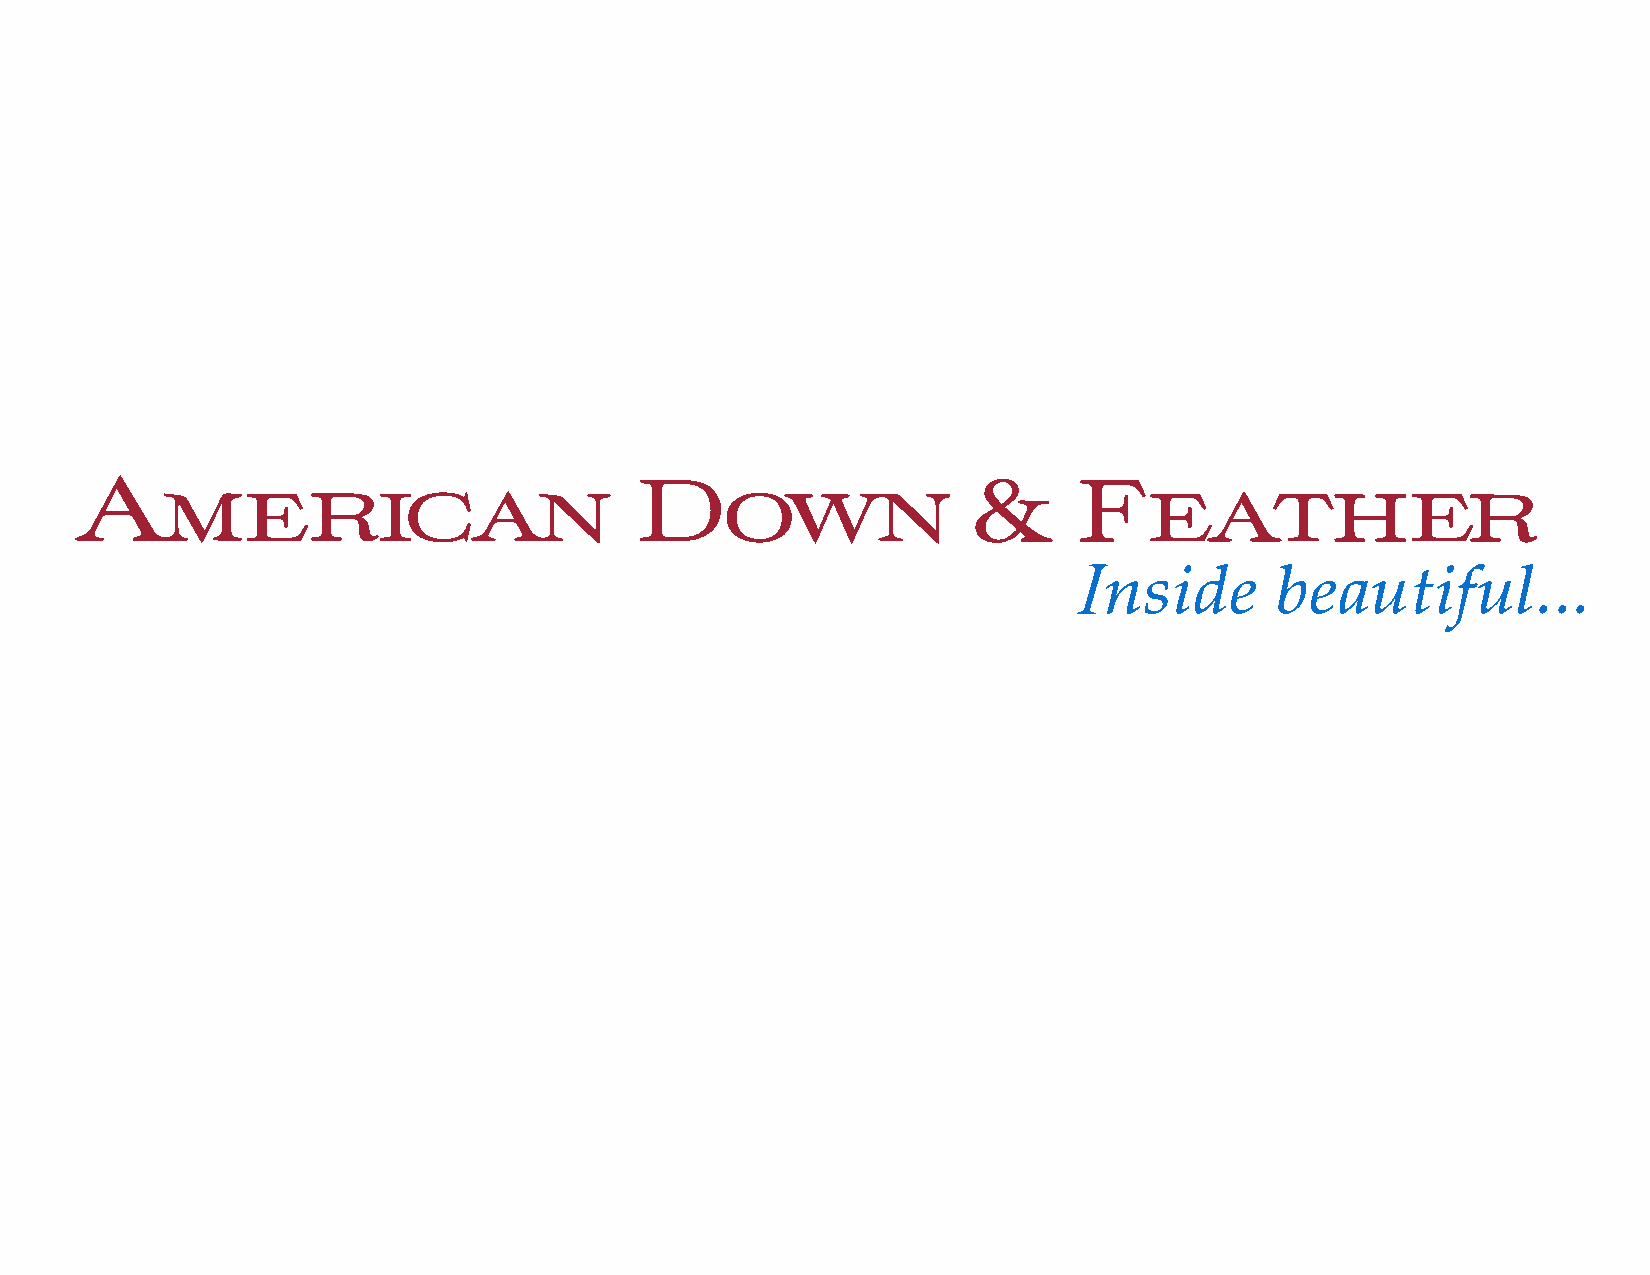 American Down & Feather